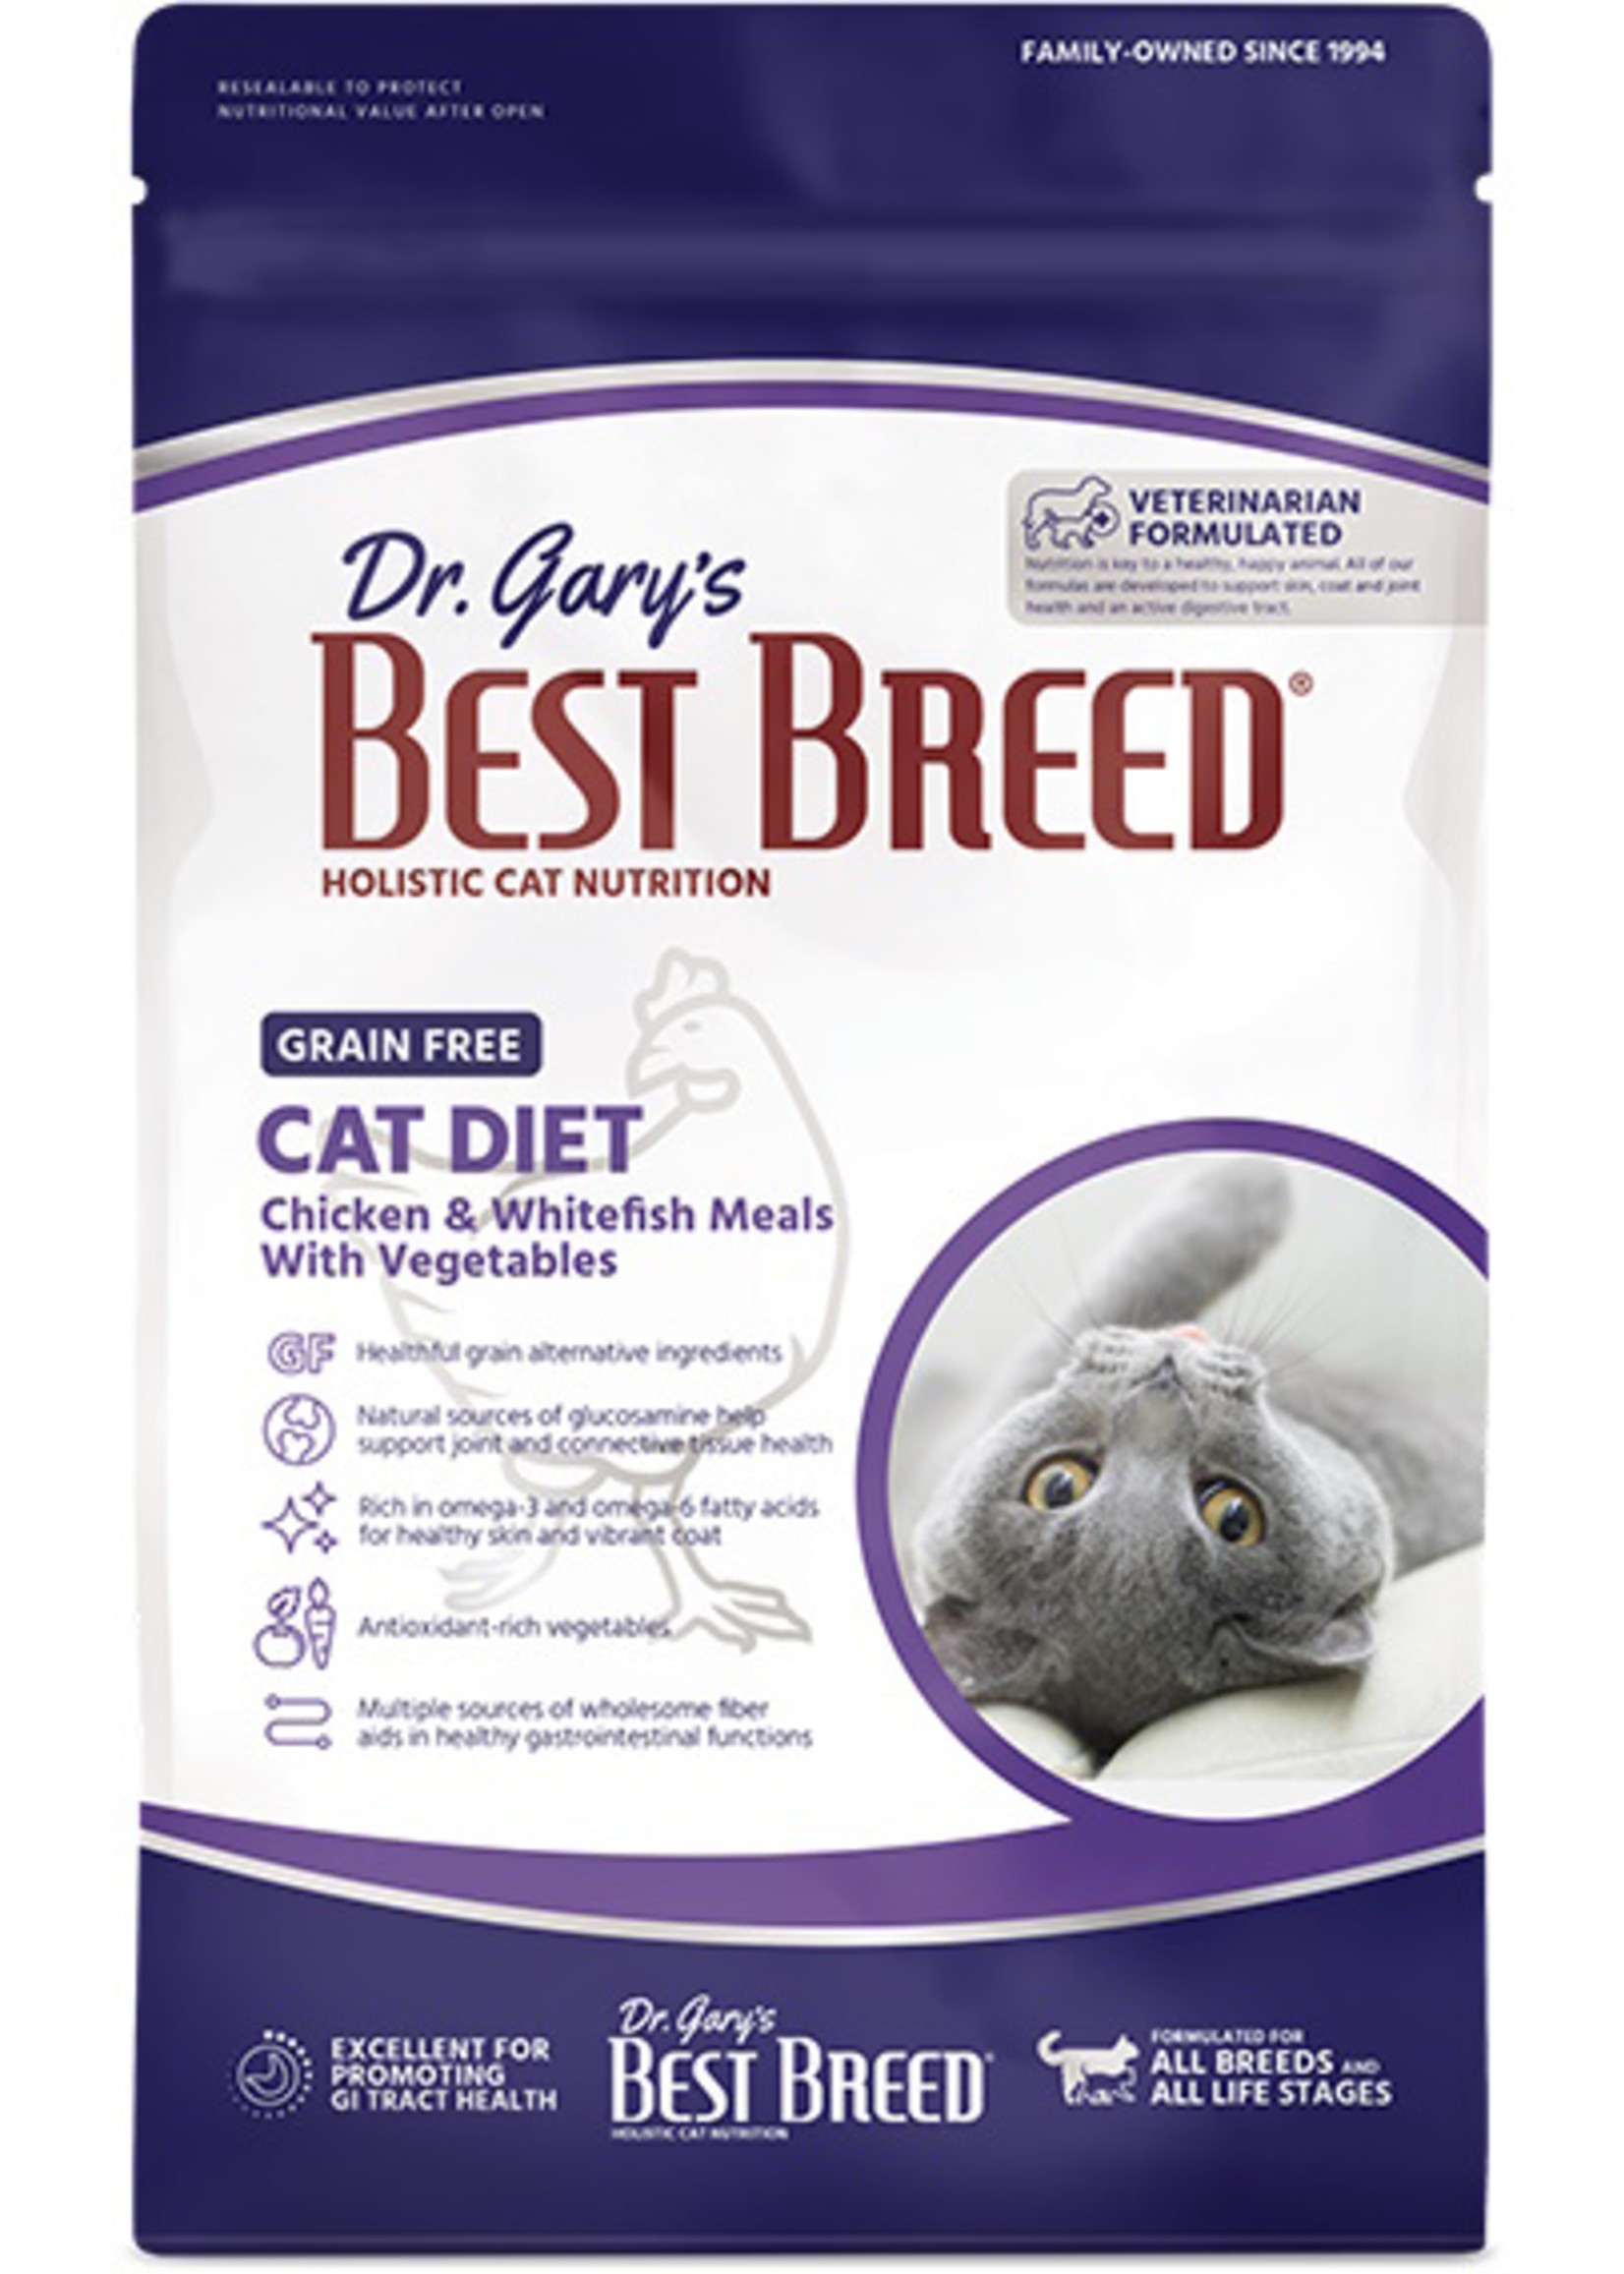 Dr. Gary's Best Breed Dr. Gary's Best Breed Holistic Grain-Free Cat Food